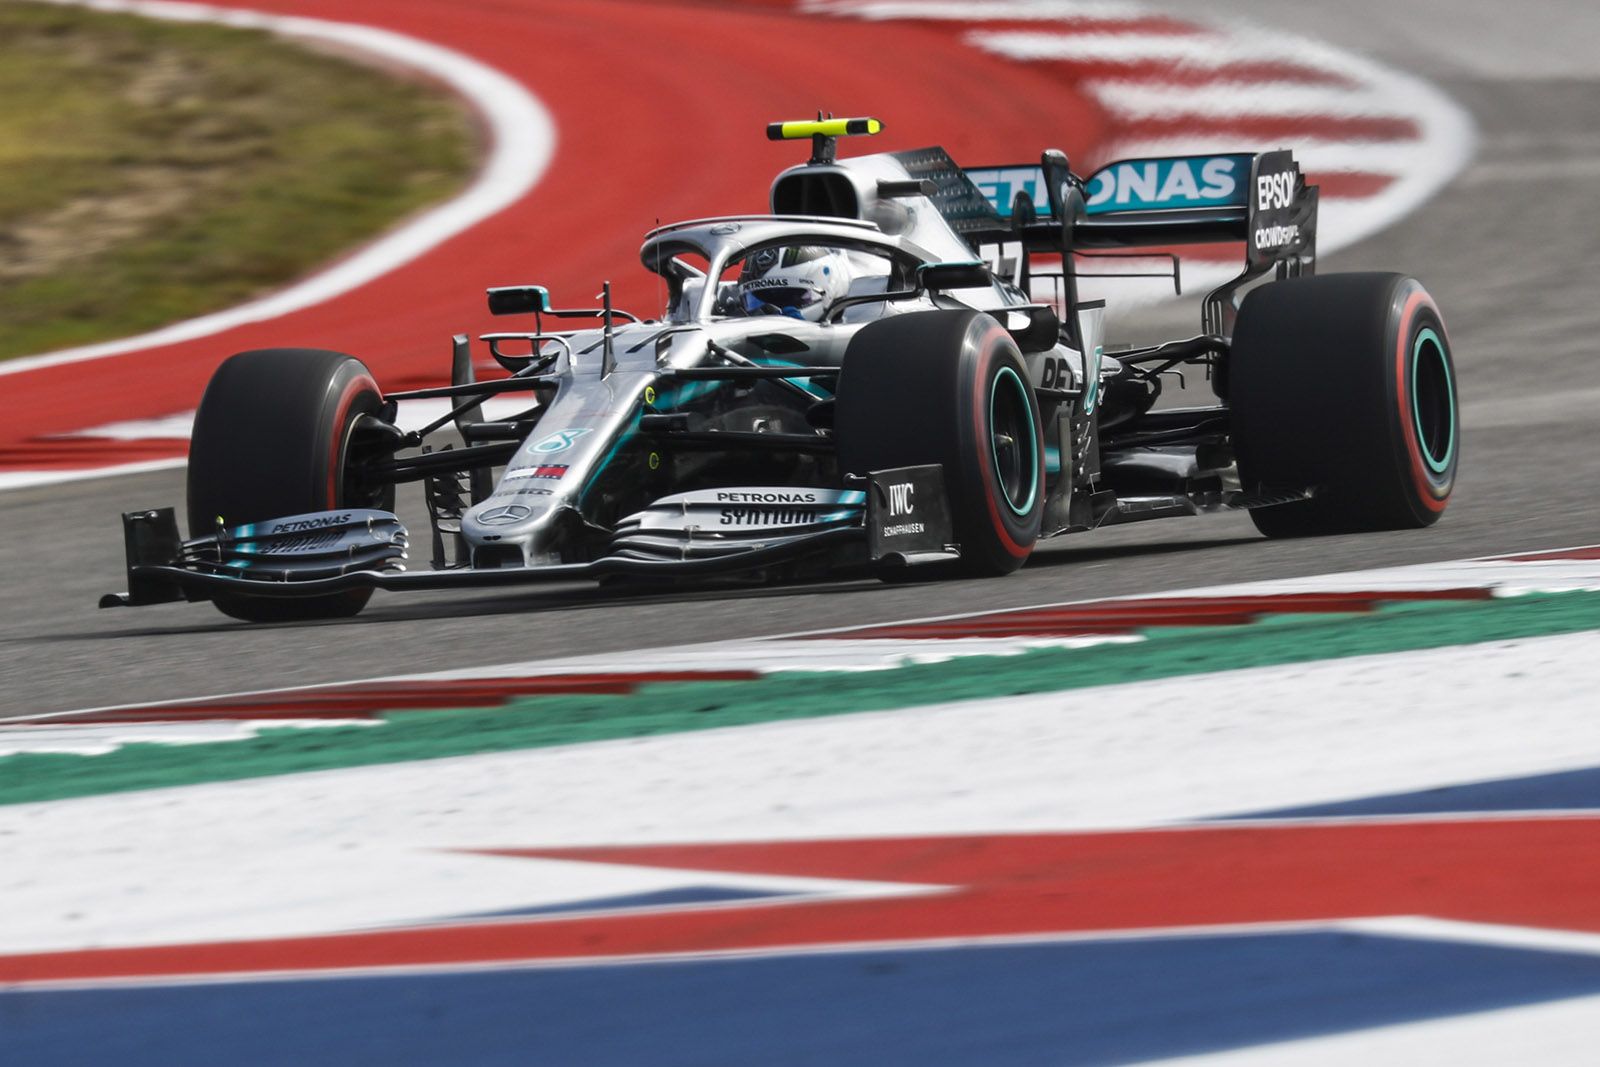 F1 US Grand Prix qualifying results Valtteri Bottas leads the way for Mercedes